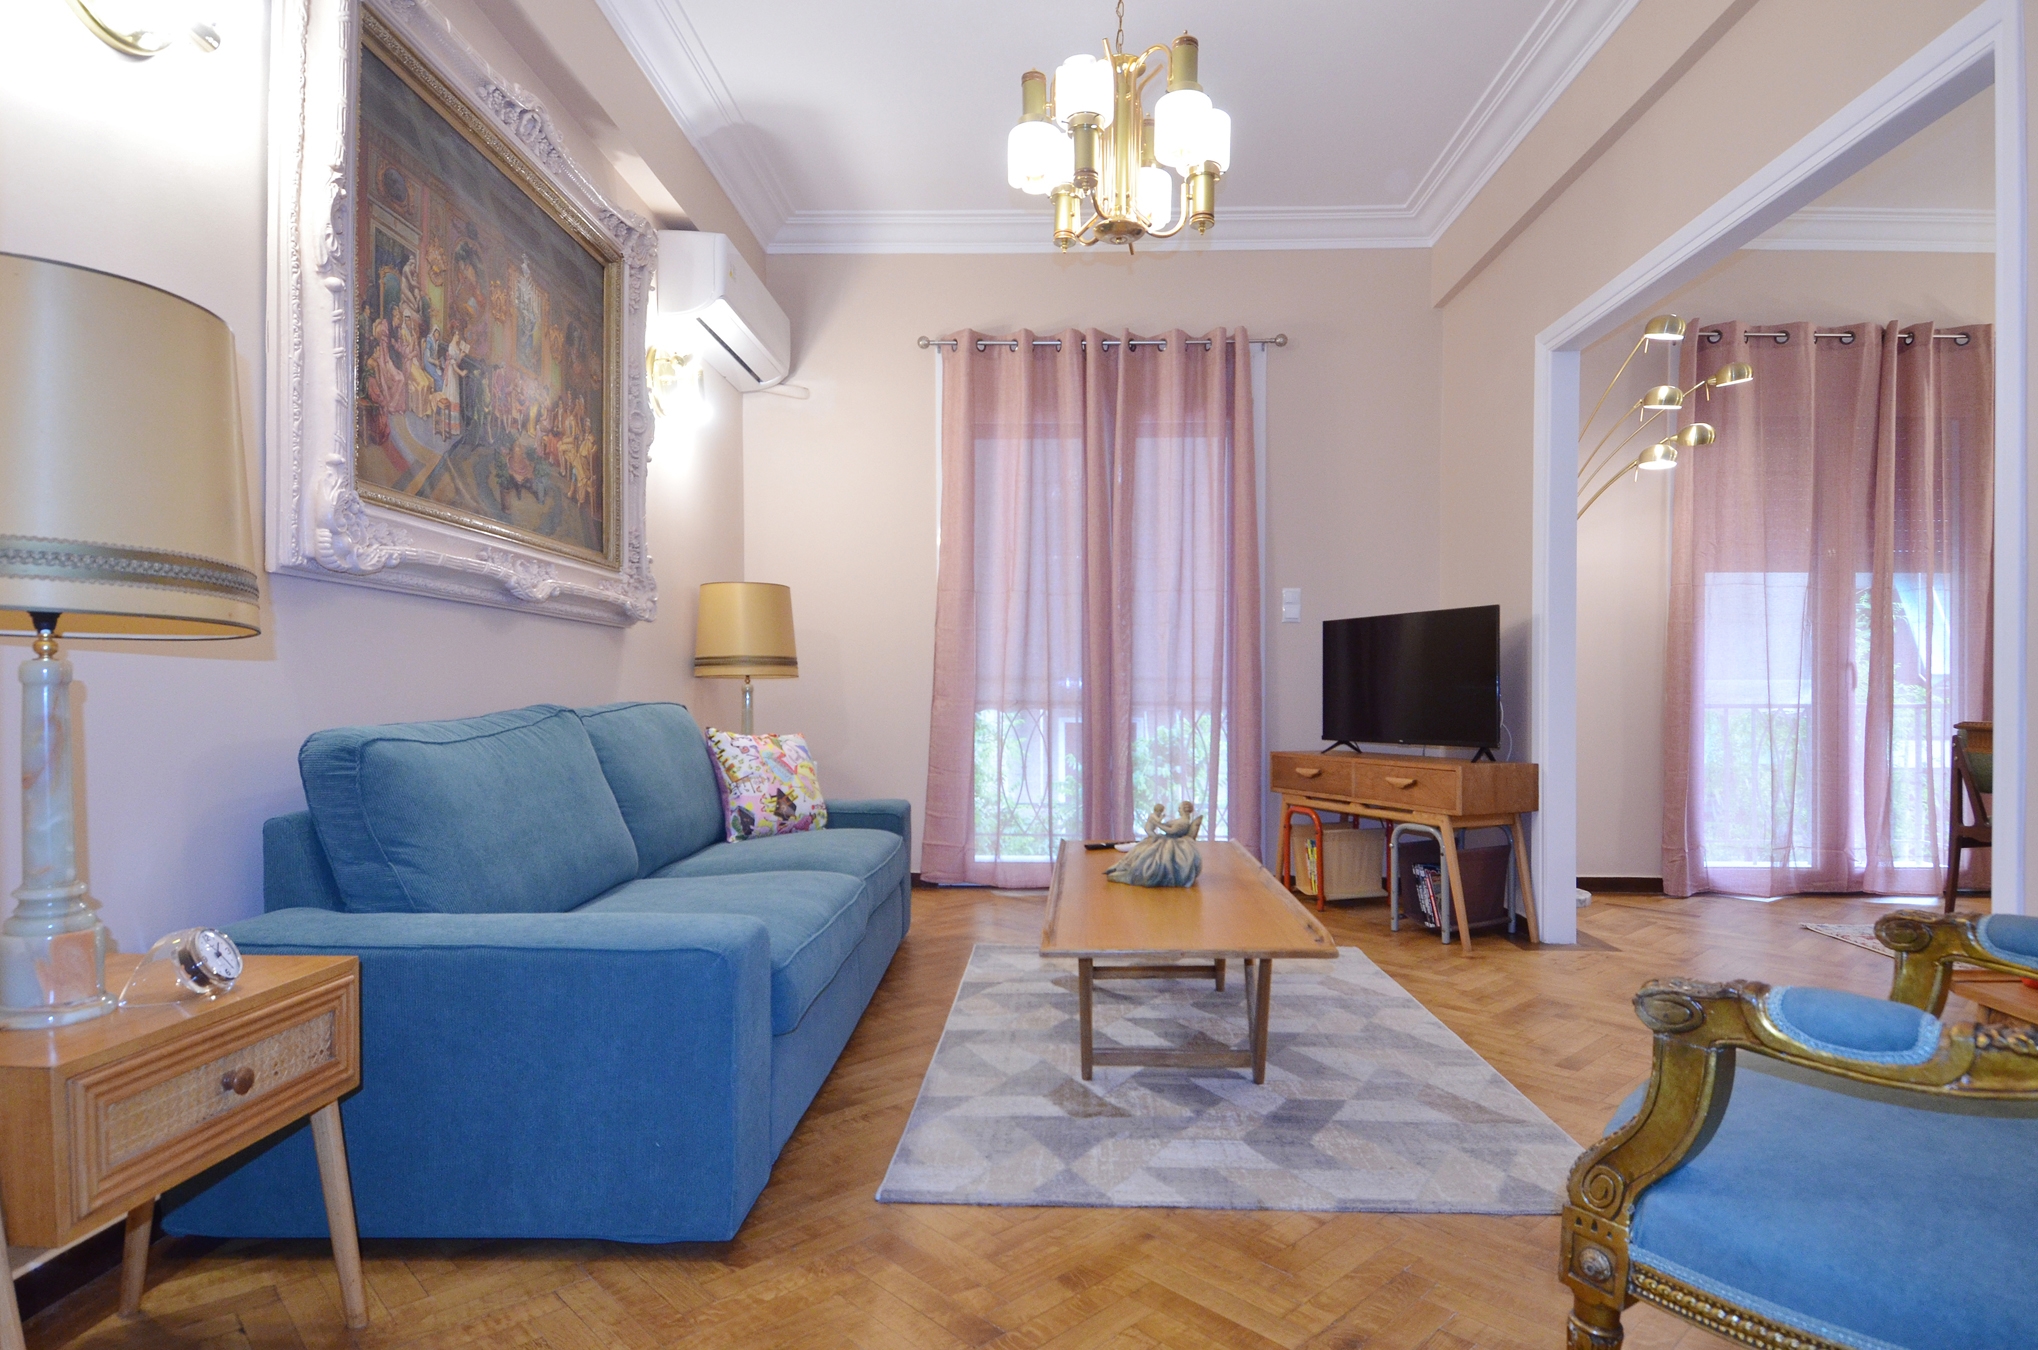  A modern and  neoclassical apartment